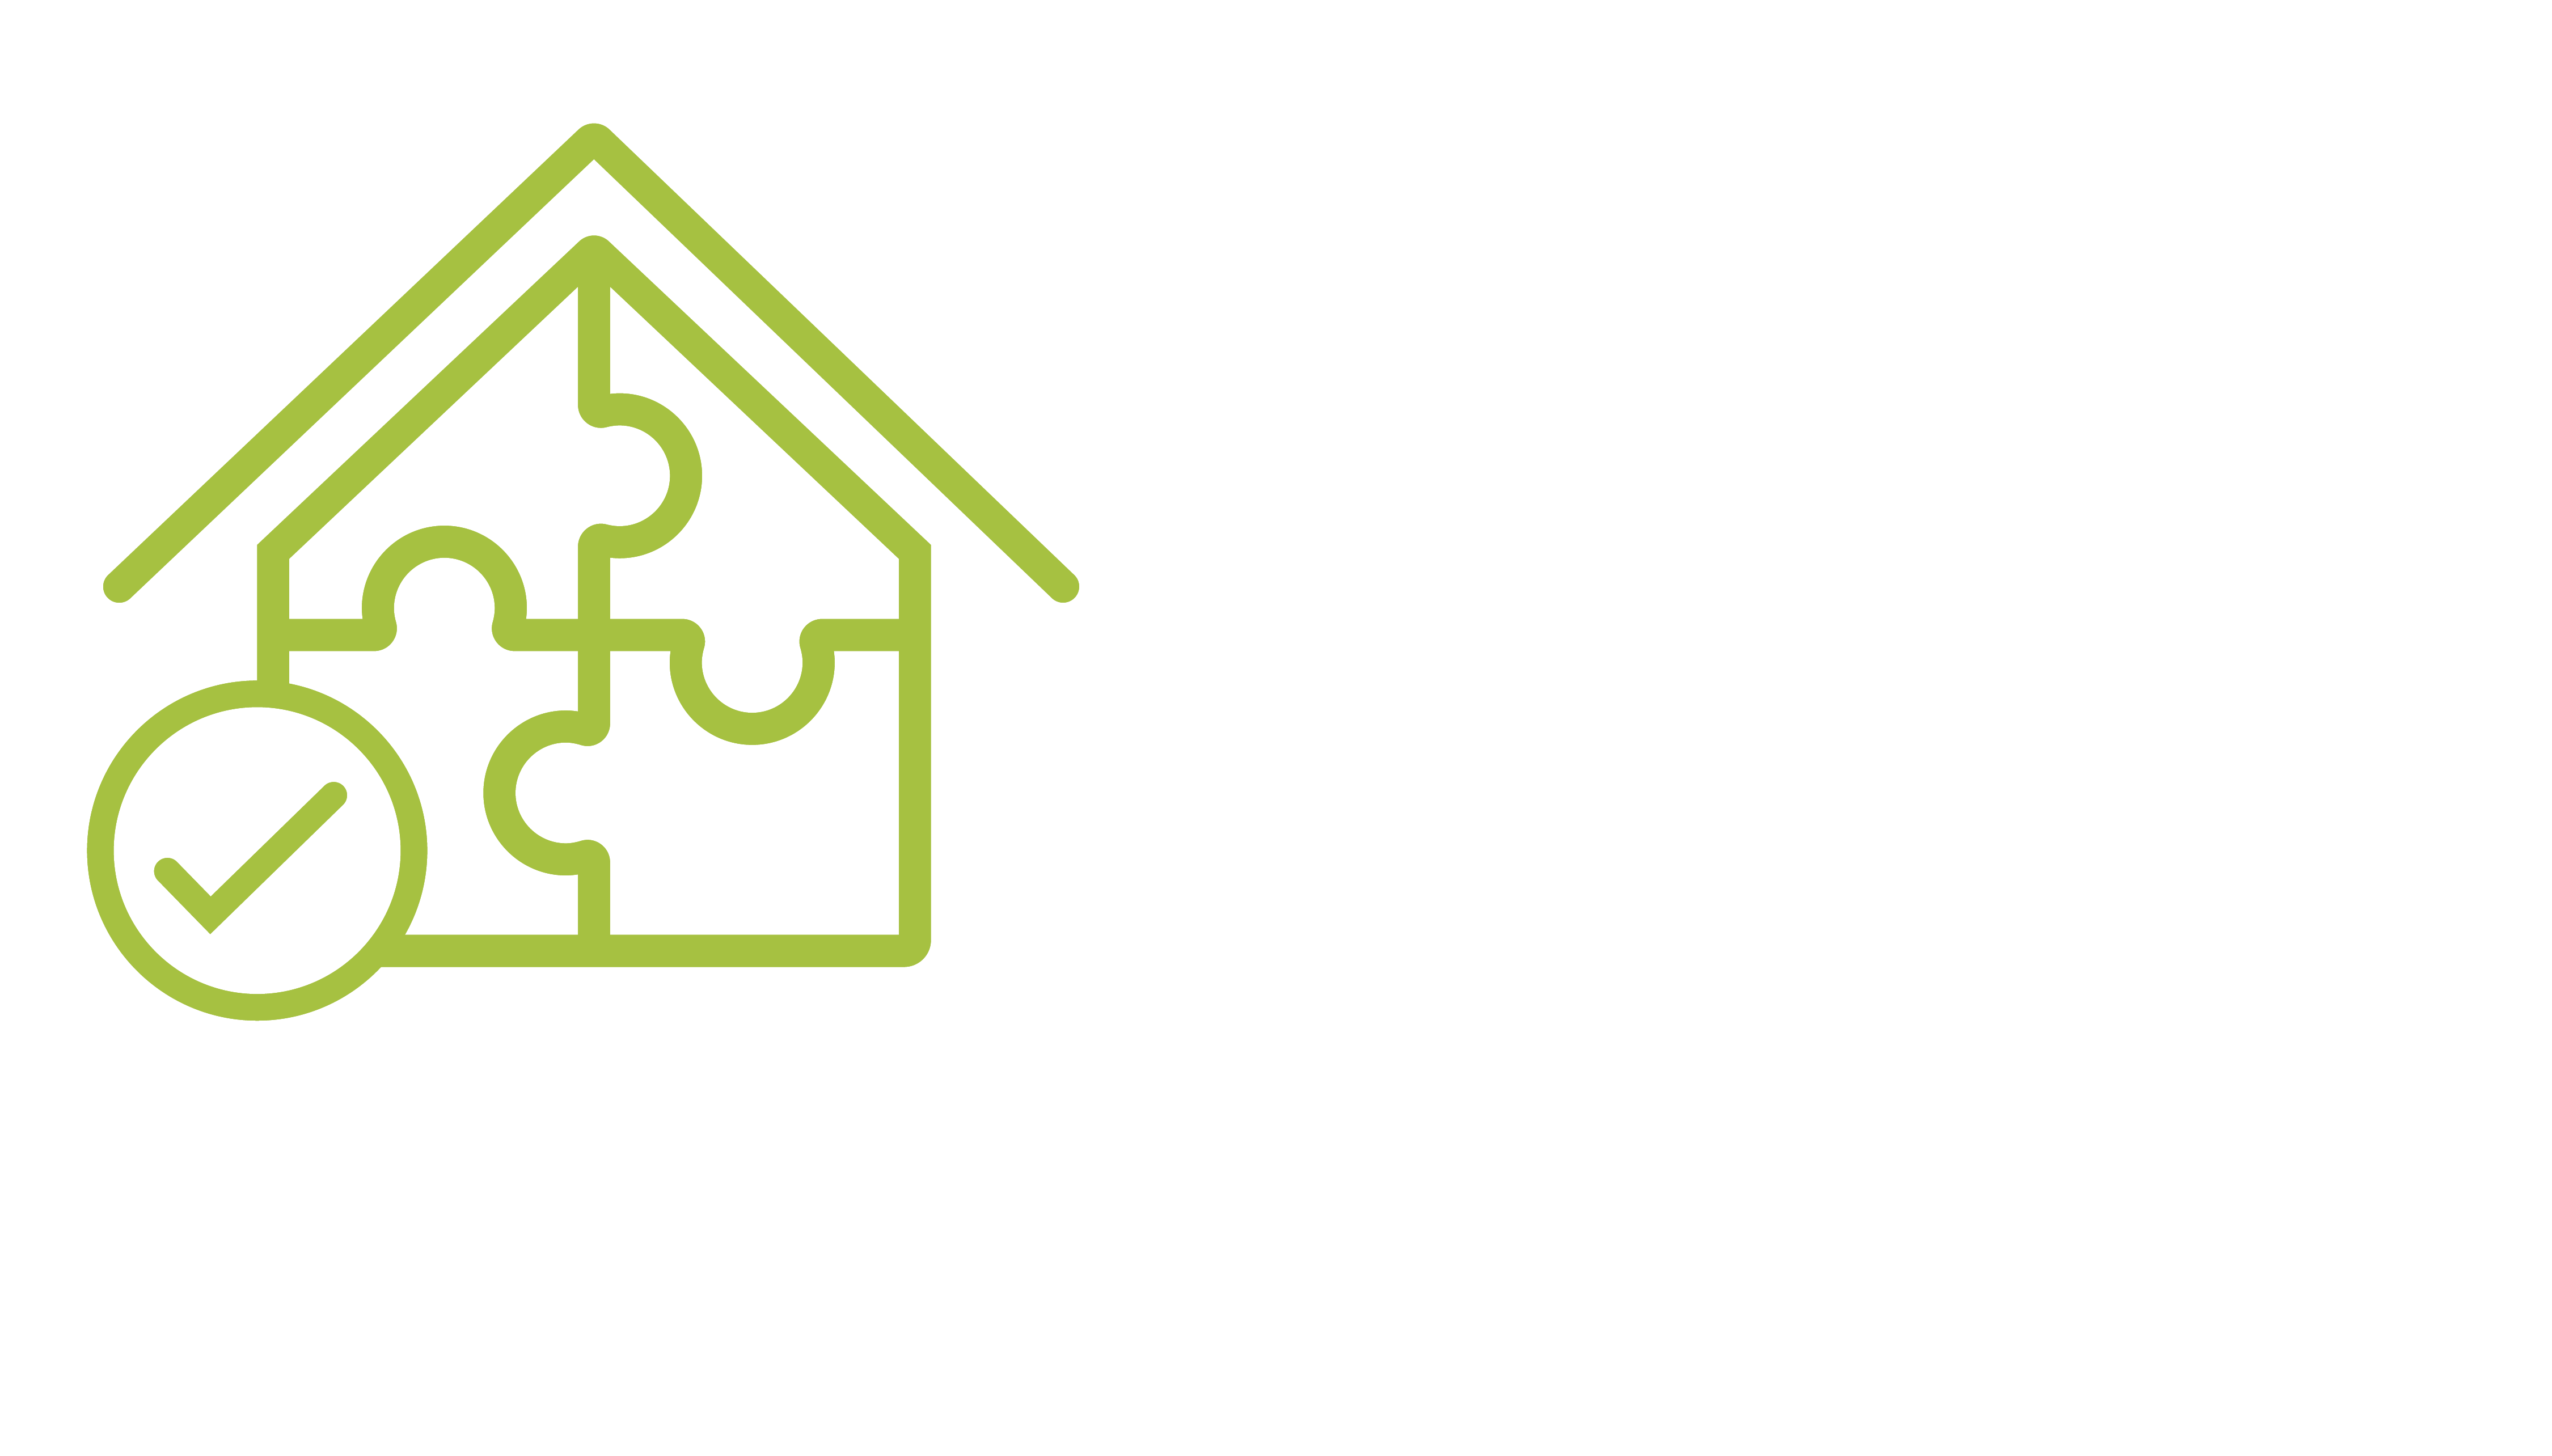 Affordable Housing icon with text